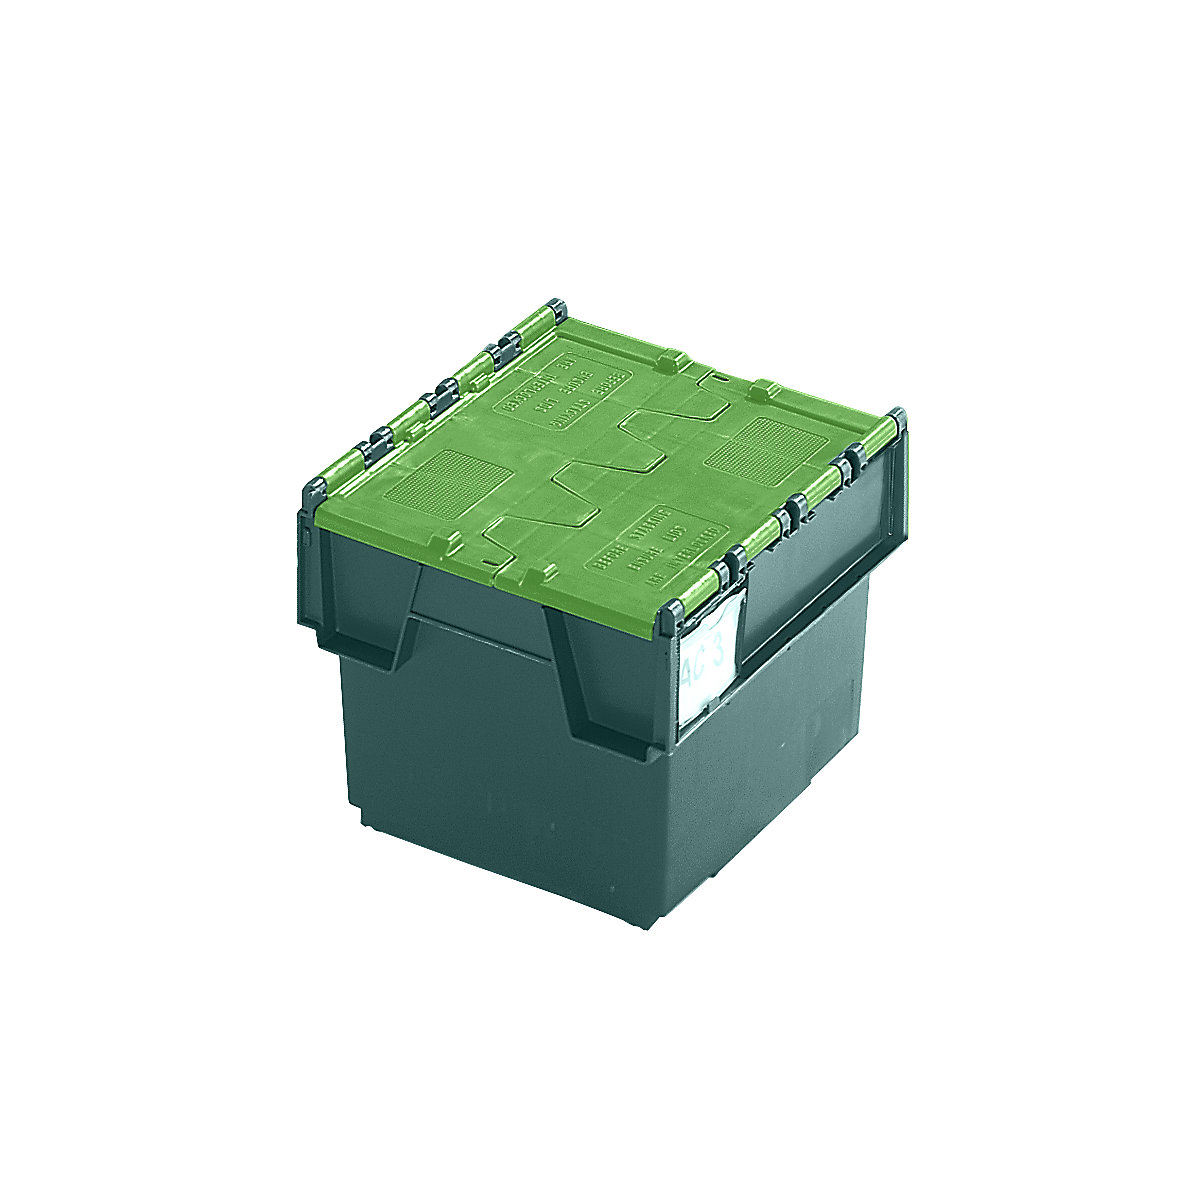 KAIMAN reusable stacking container, capacity 20 litres, LxWxH 400 x 300 x 252 mm, green, 10+ items